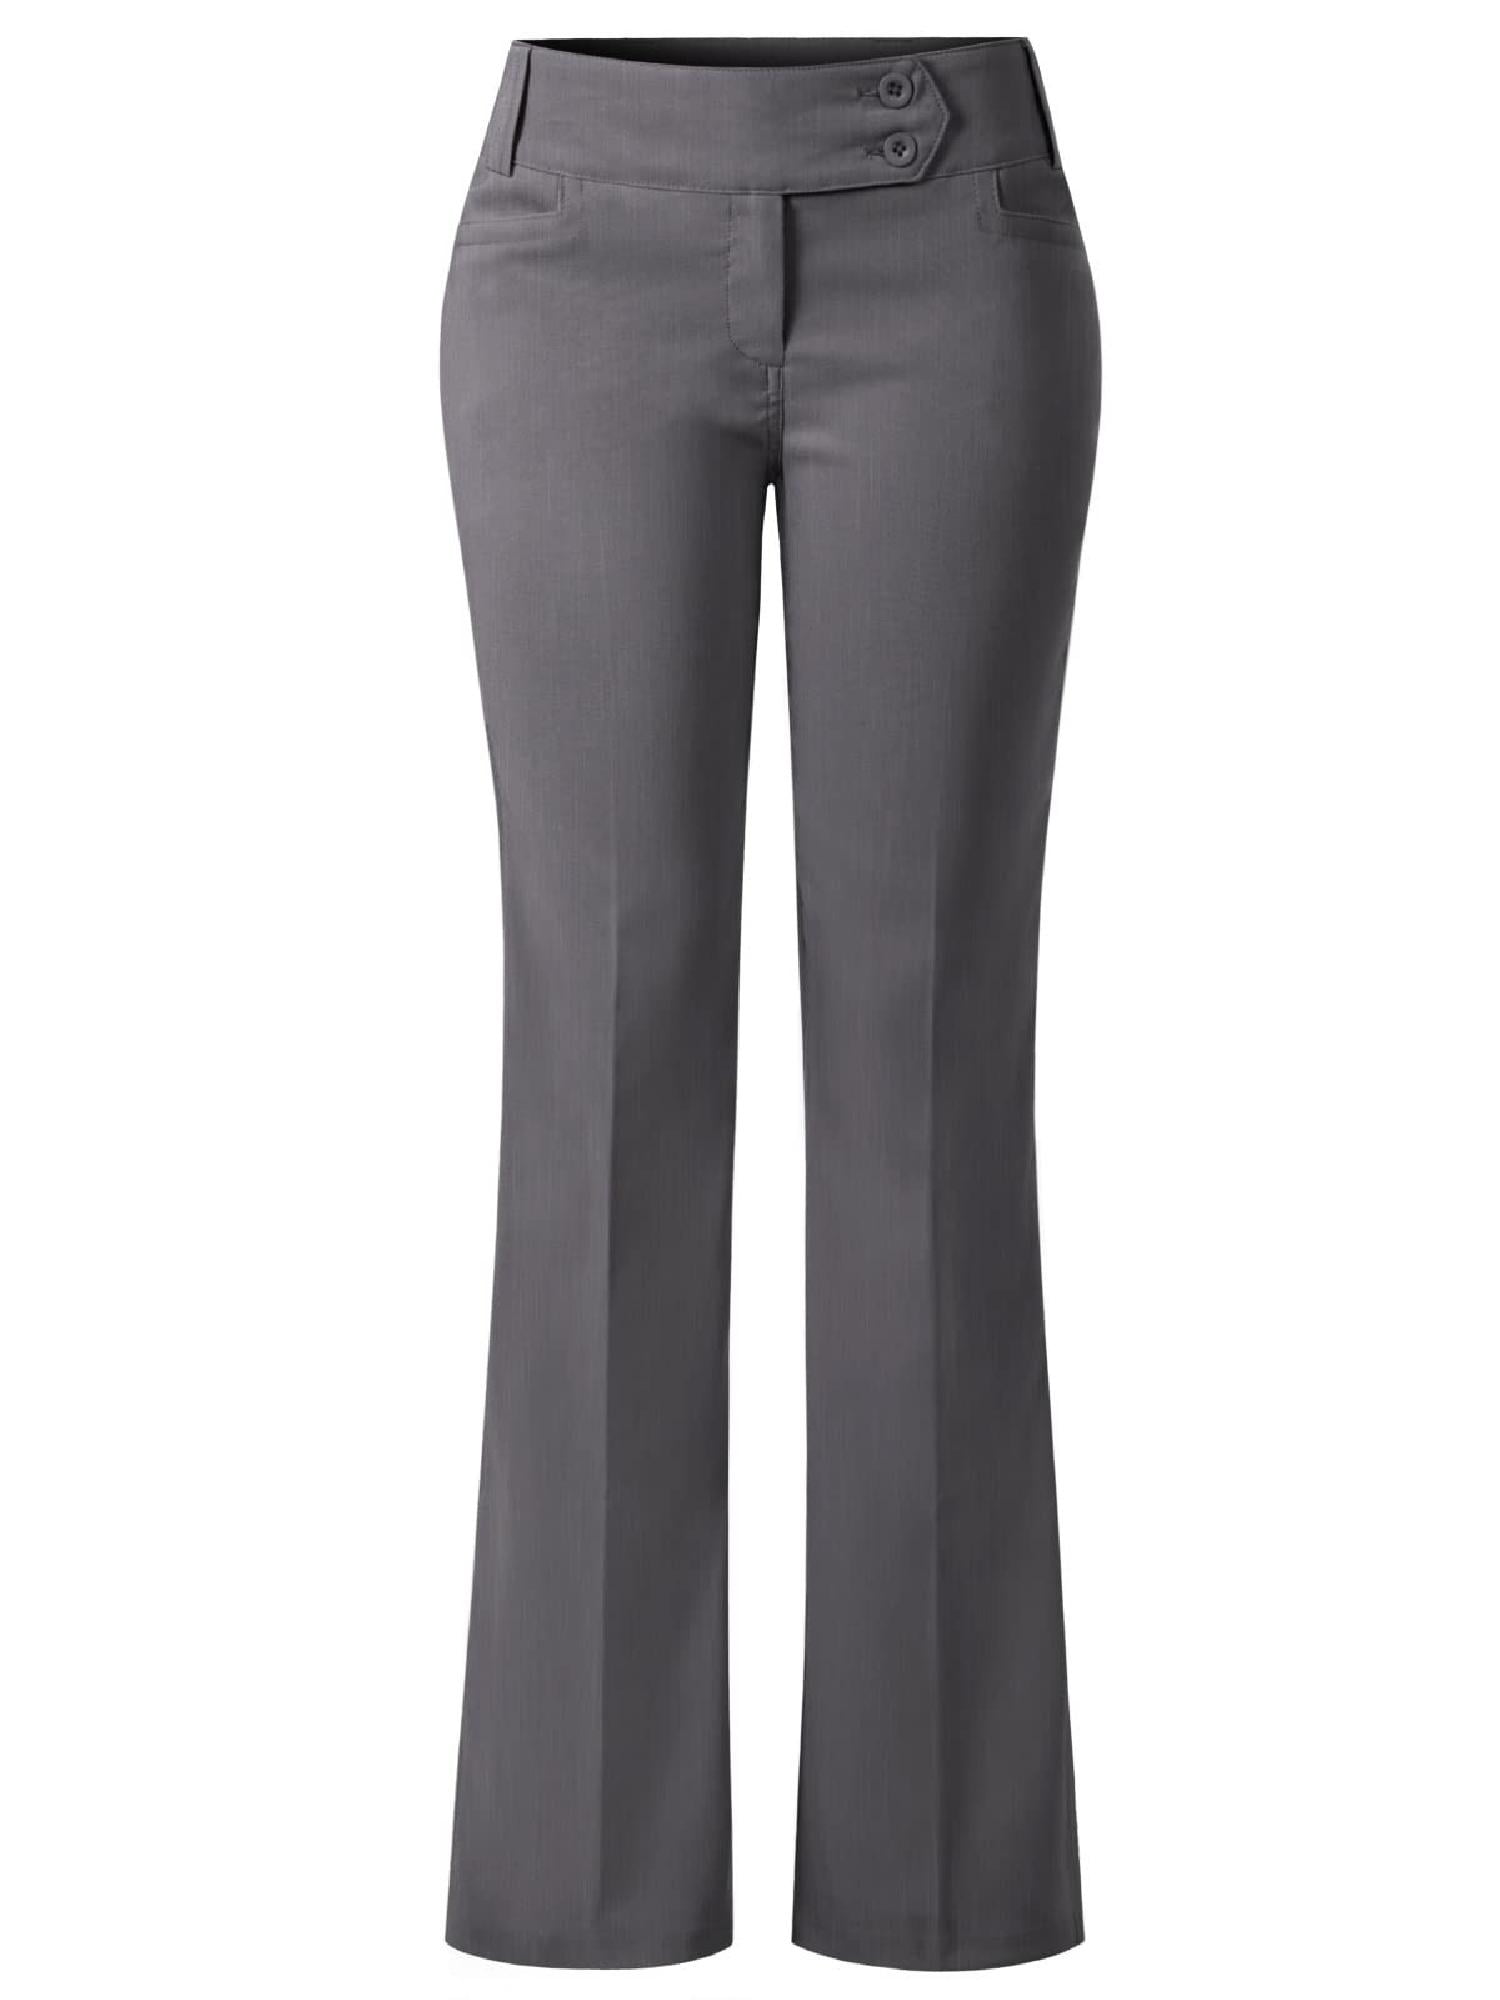 Made by Olivia Women's Relaxed Boot-Cut Stretch Office Pants Trousers Slacks